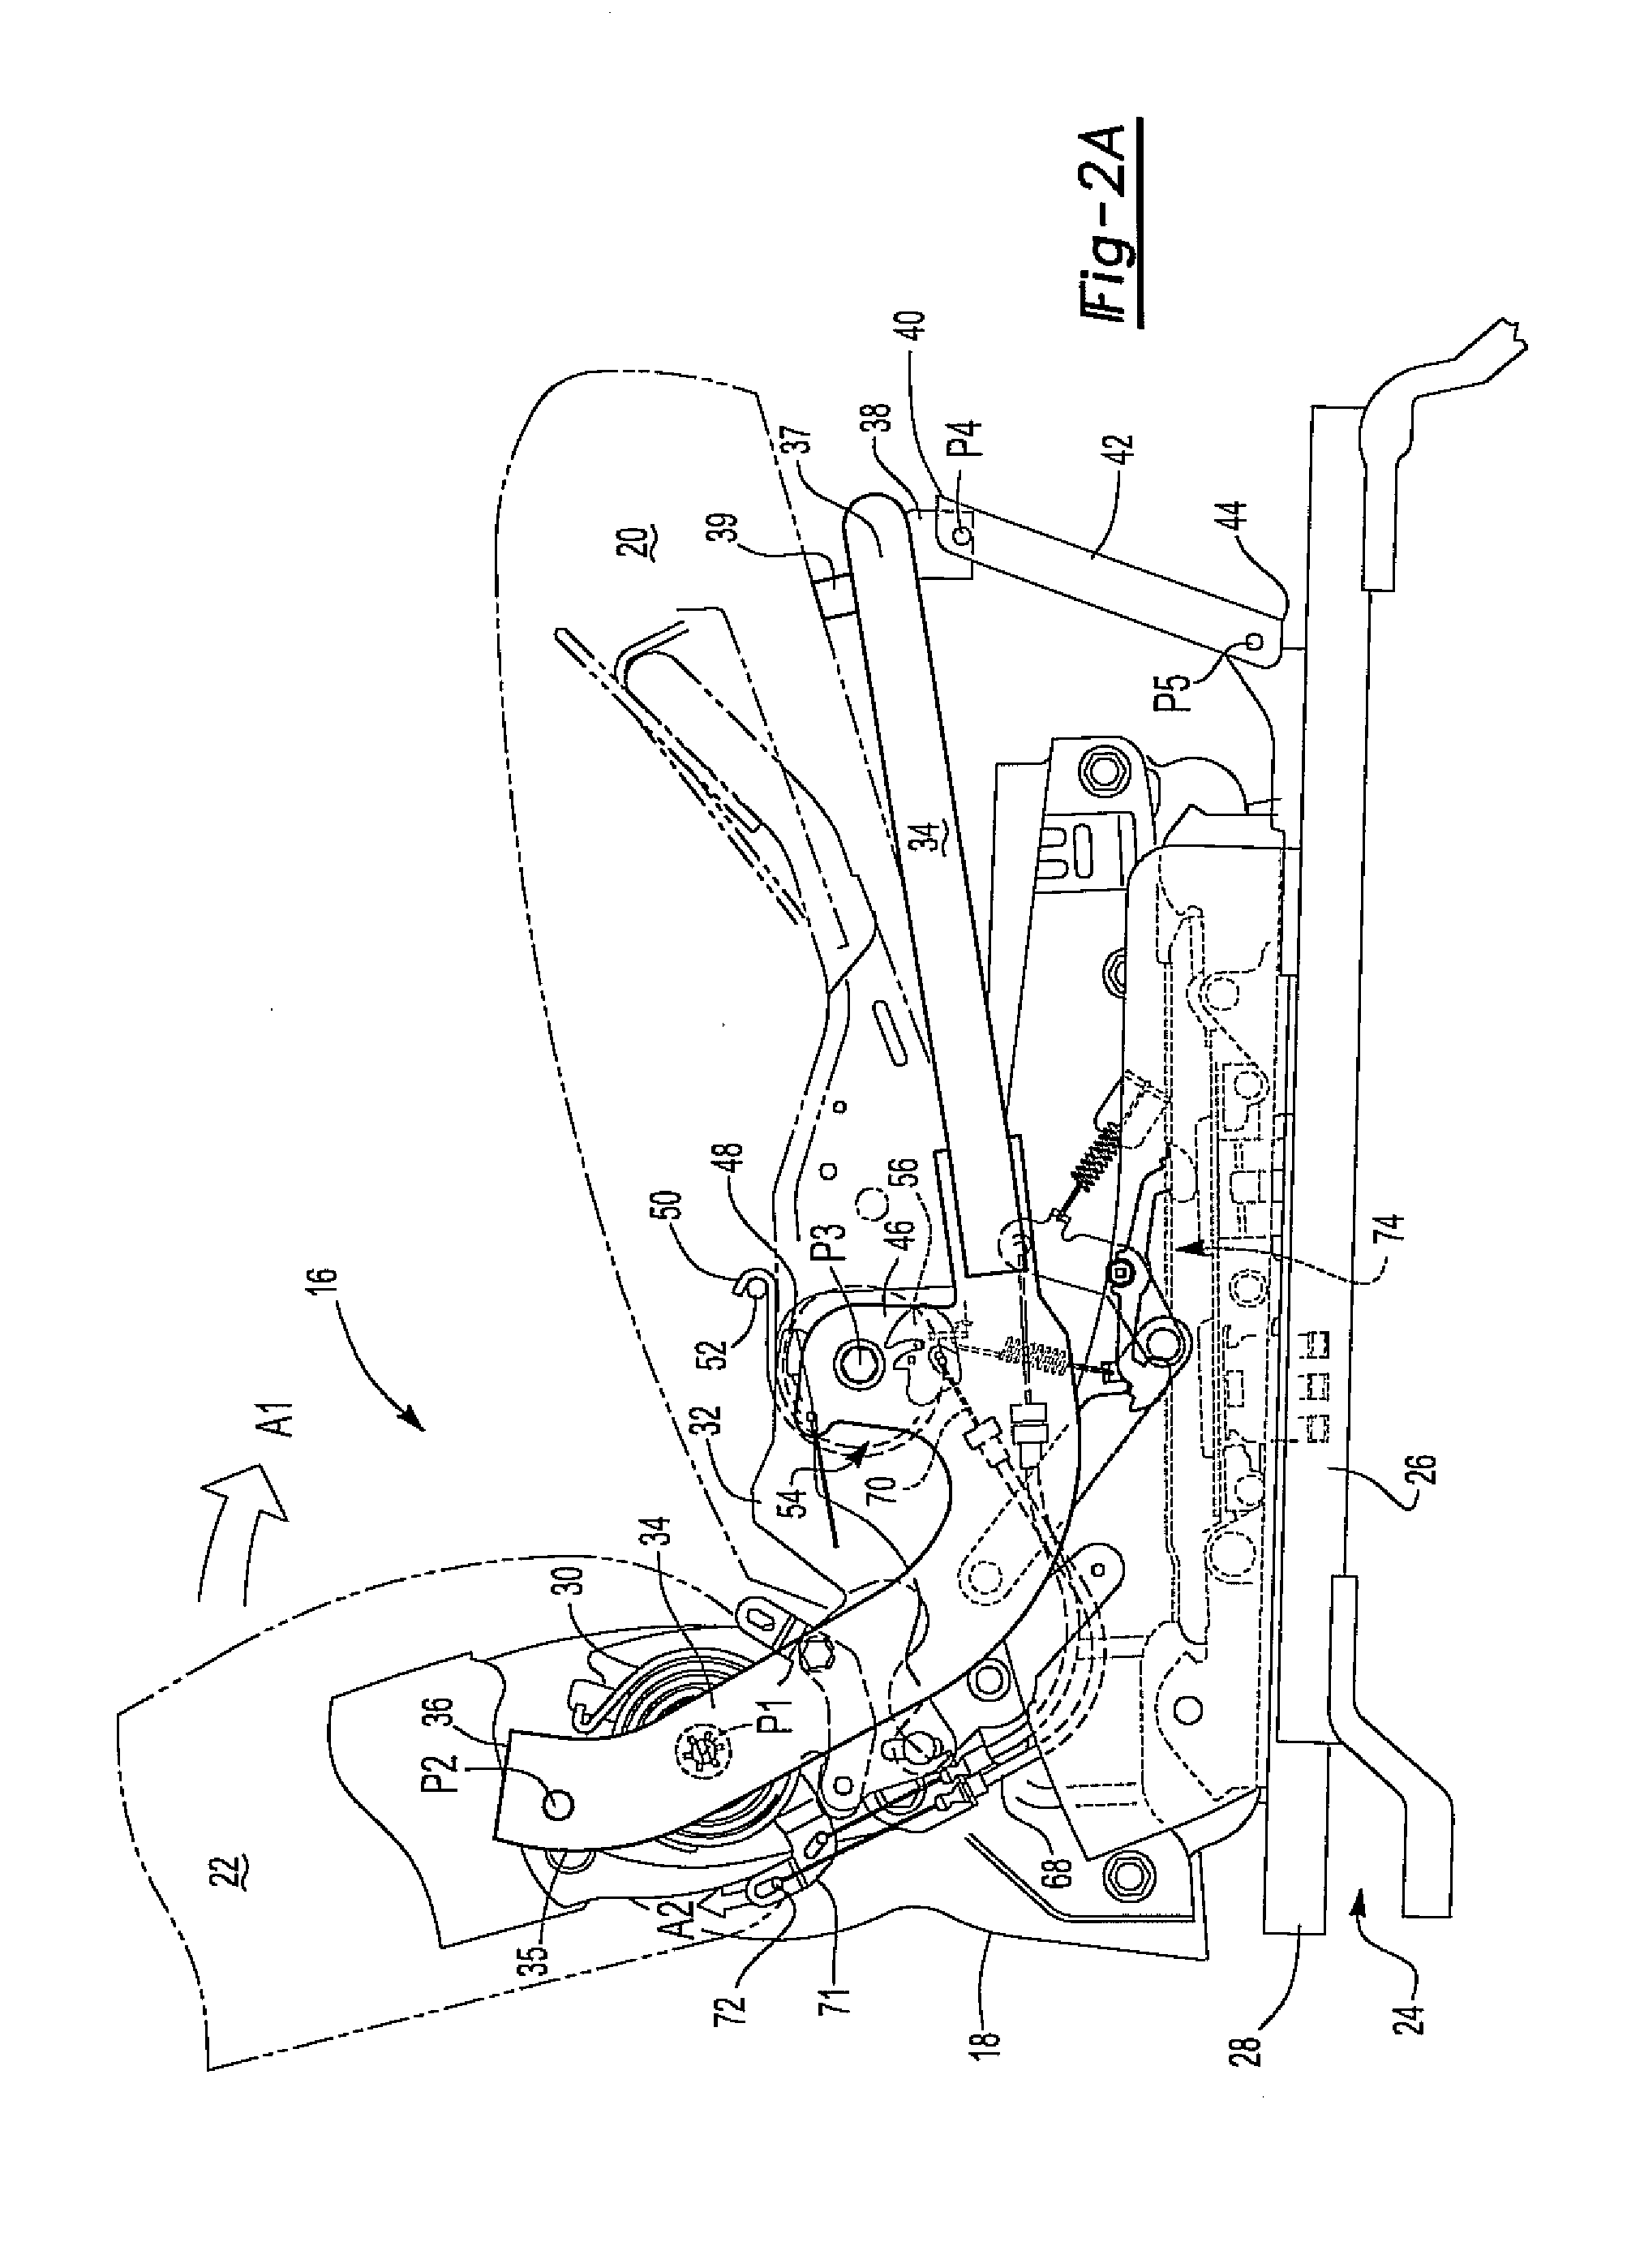 Folding seat assembly having automatic seat cushion tip-up